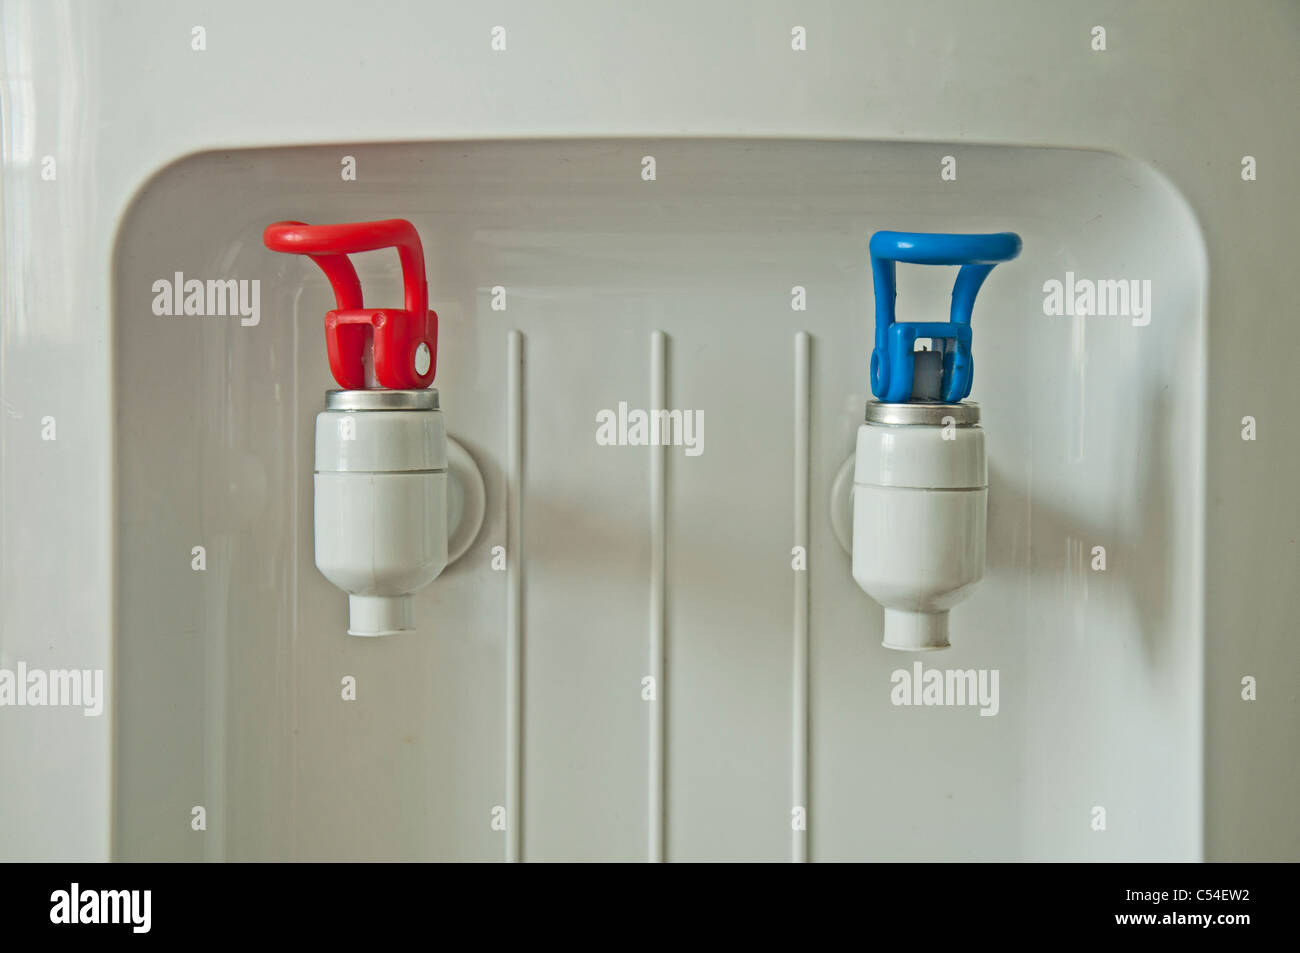 Hot and cold water machine with red and blue spouts Stock Photo